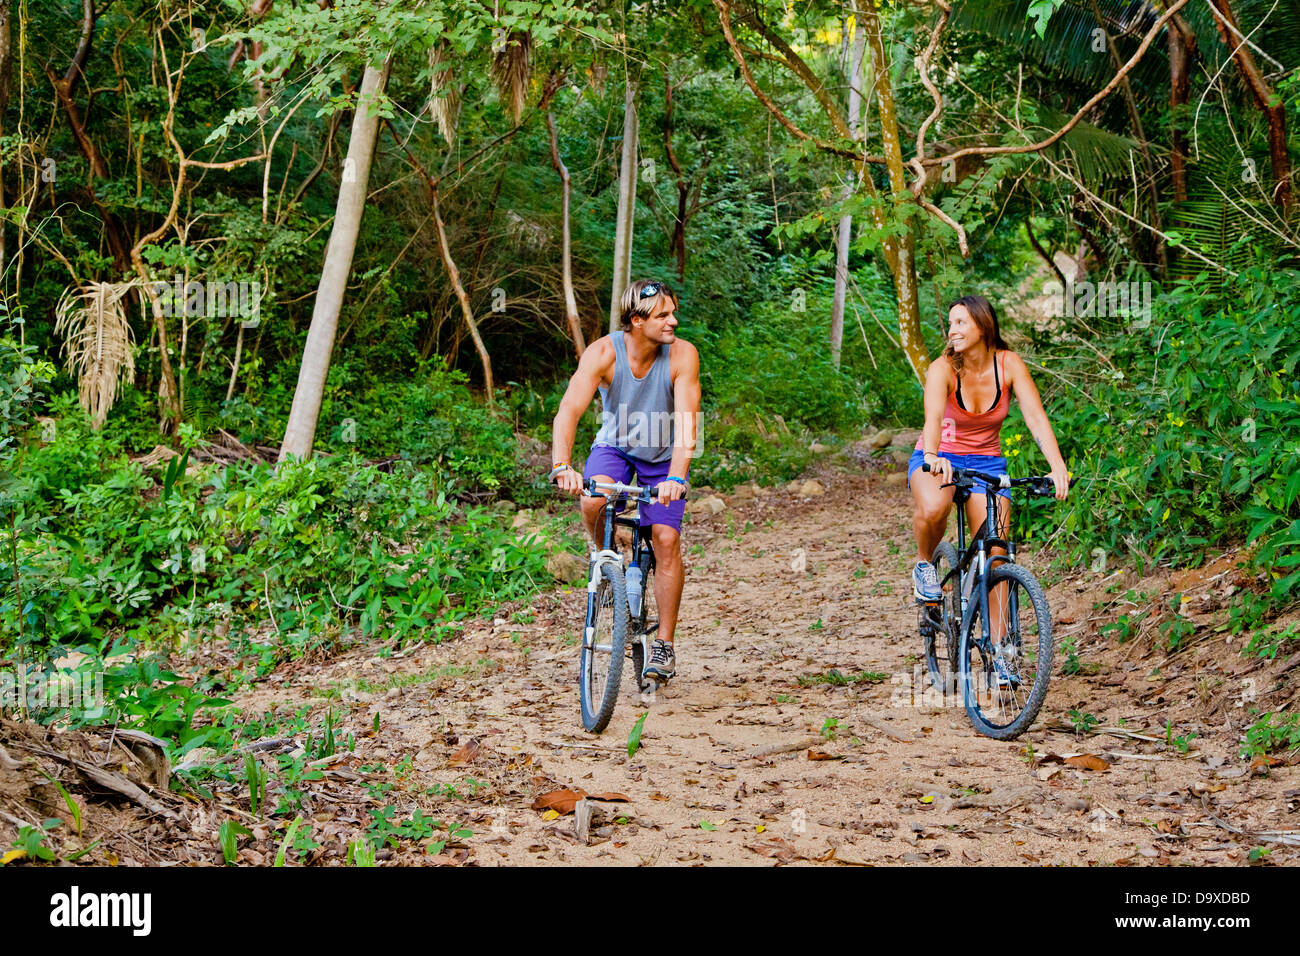 Couple riding bicycles on jungle path Stock Photo